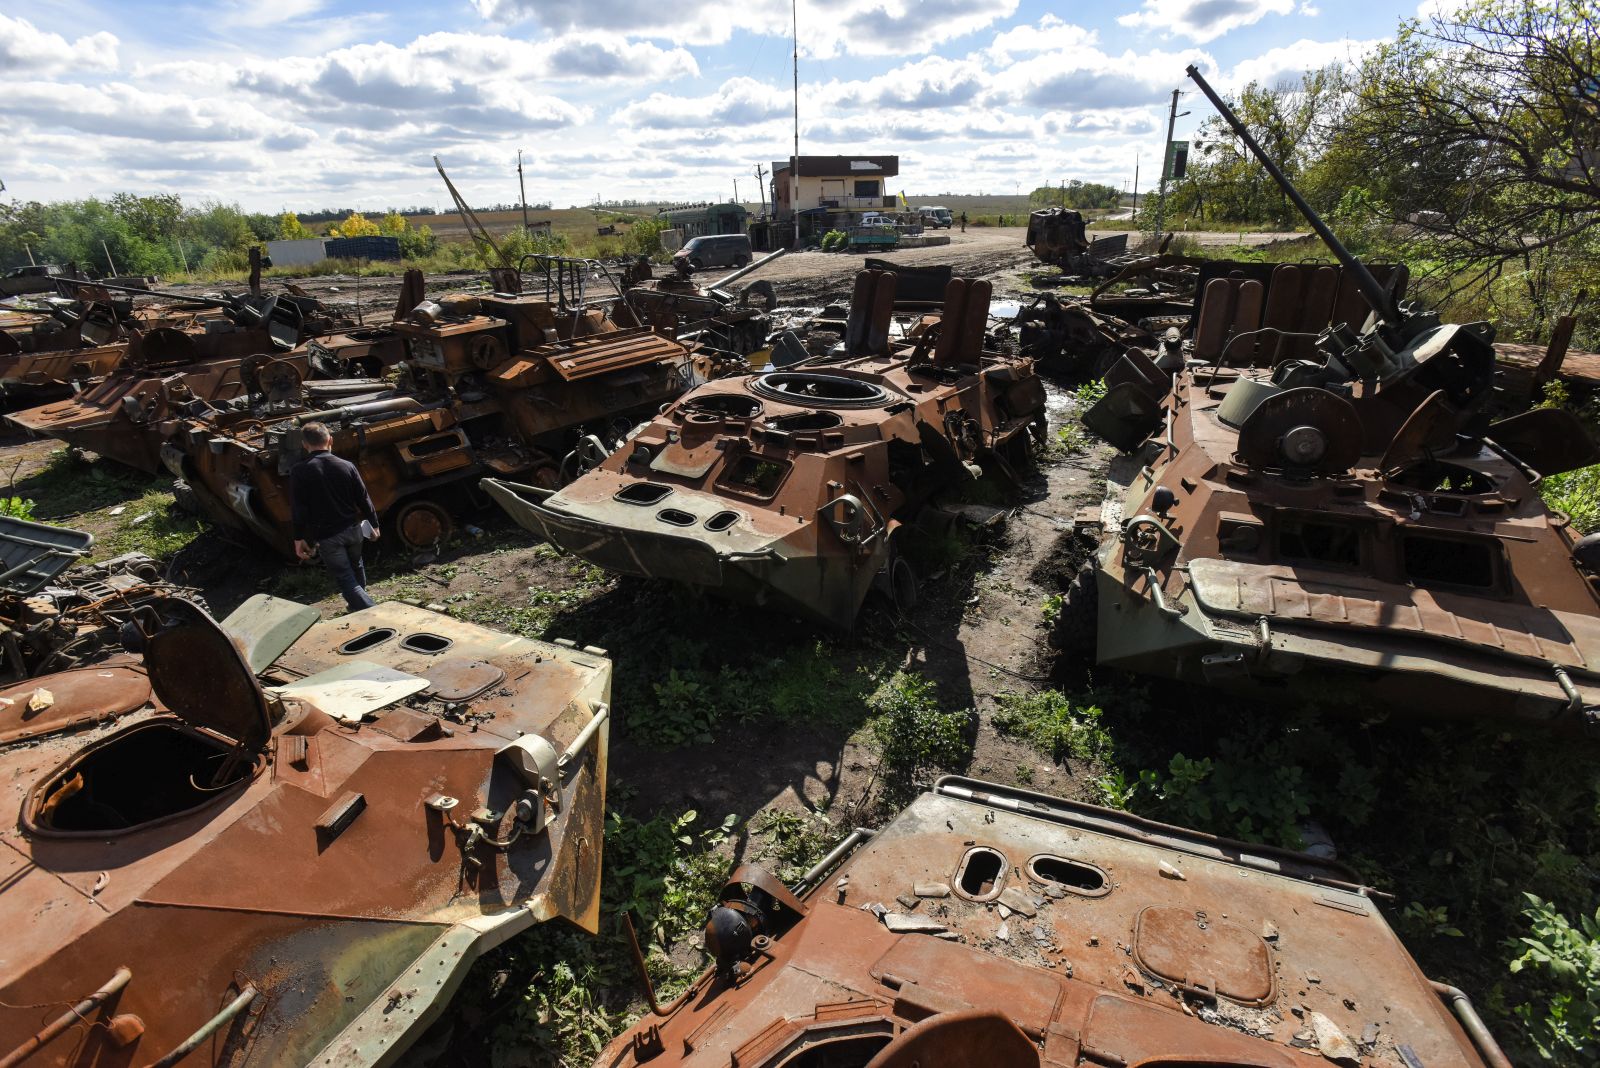 epa10199822 A junkyard of destroyed army vehicles in Izyum, Kharkiv region, Ukraine, 22 September 2022. The Ukrainian army pushed Russian troops from occupied territory in the northeast of the country in a counterattack. Kharkiv and surrounding areas have been the target of heavy shelling since February 2022, when Russian troops entered Ukraine starting a conflict that has provoked destruction and a humanitarian crisis.  EPA/OLEG PETRASYUK